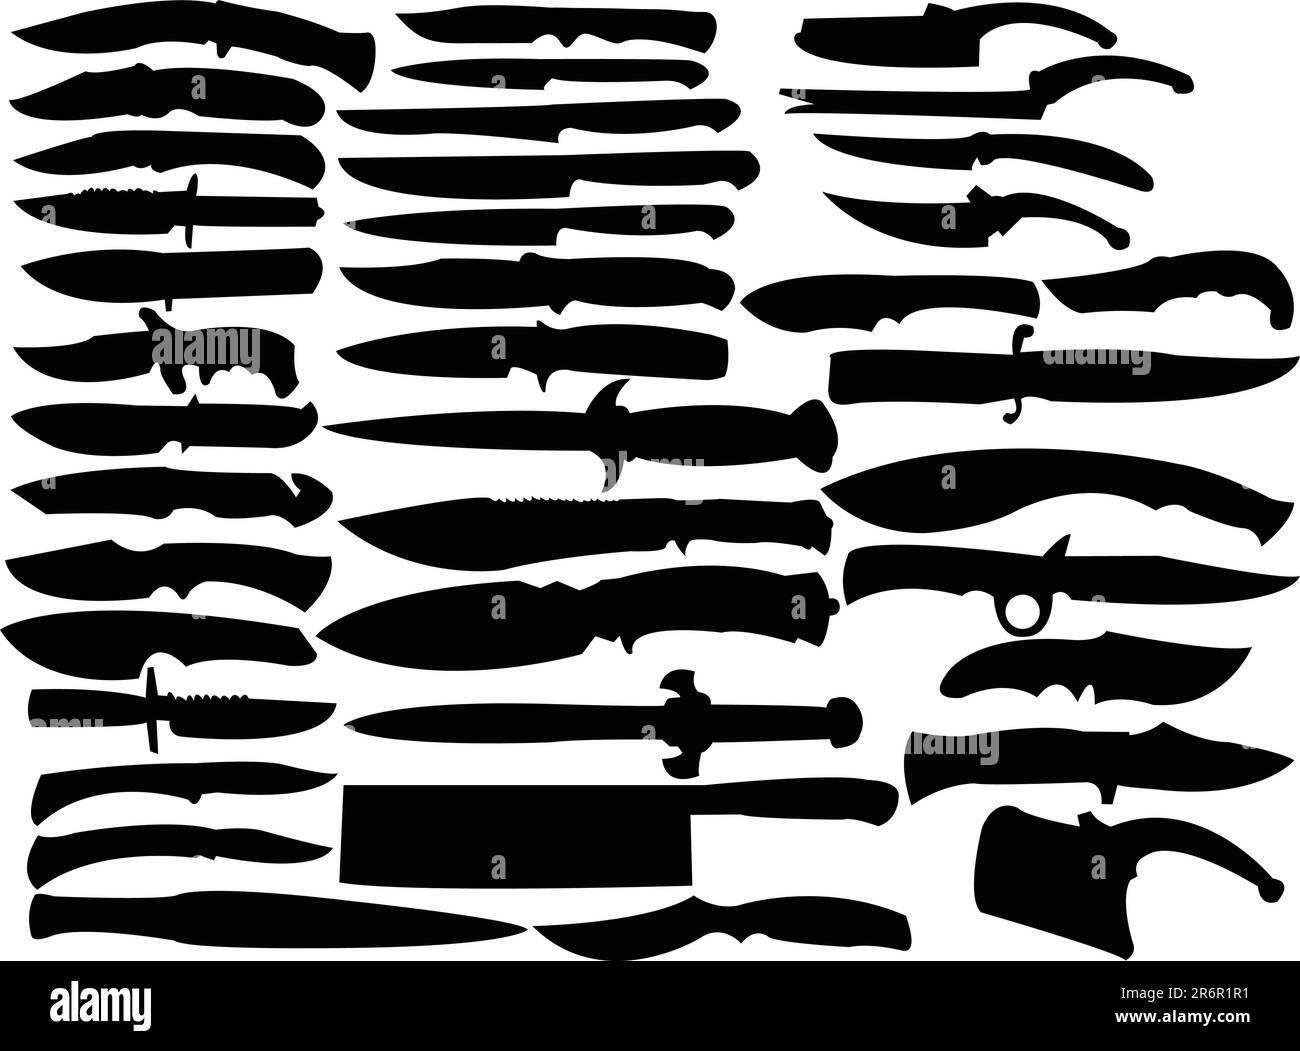 knifes collection - vector Stock Vector